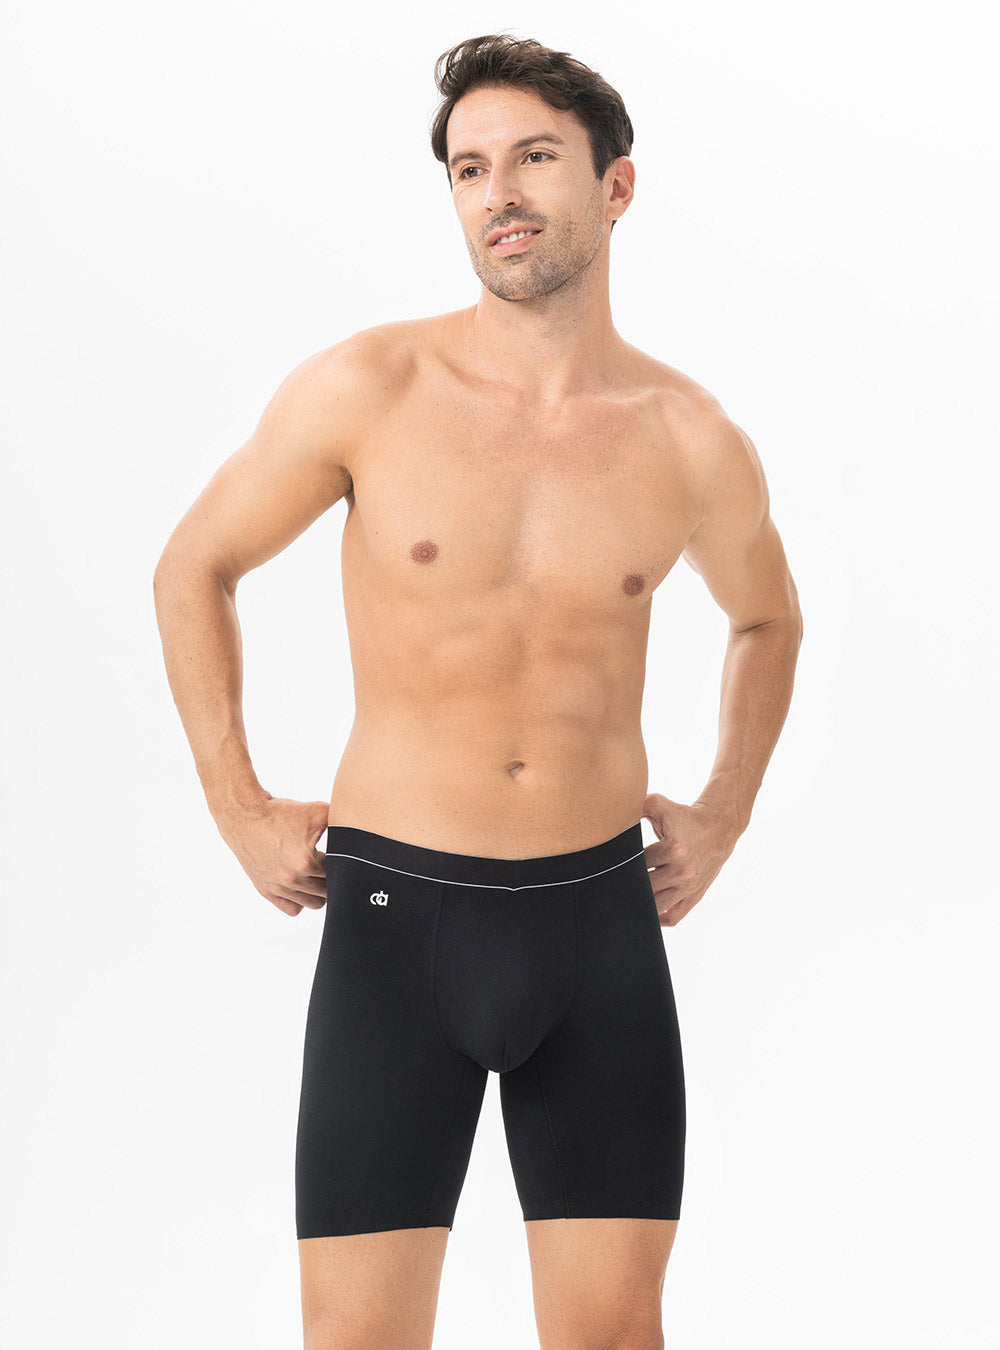 What is the most comfortable, breathable underwear that is not too